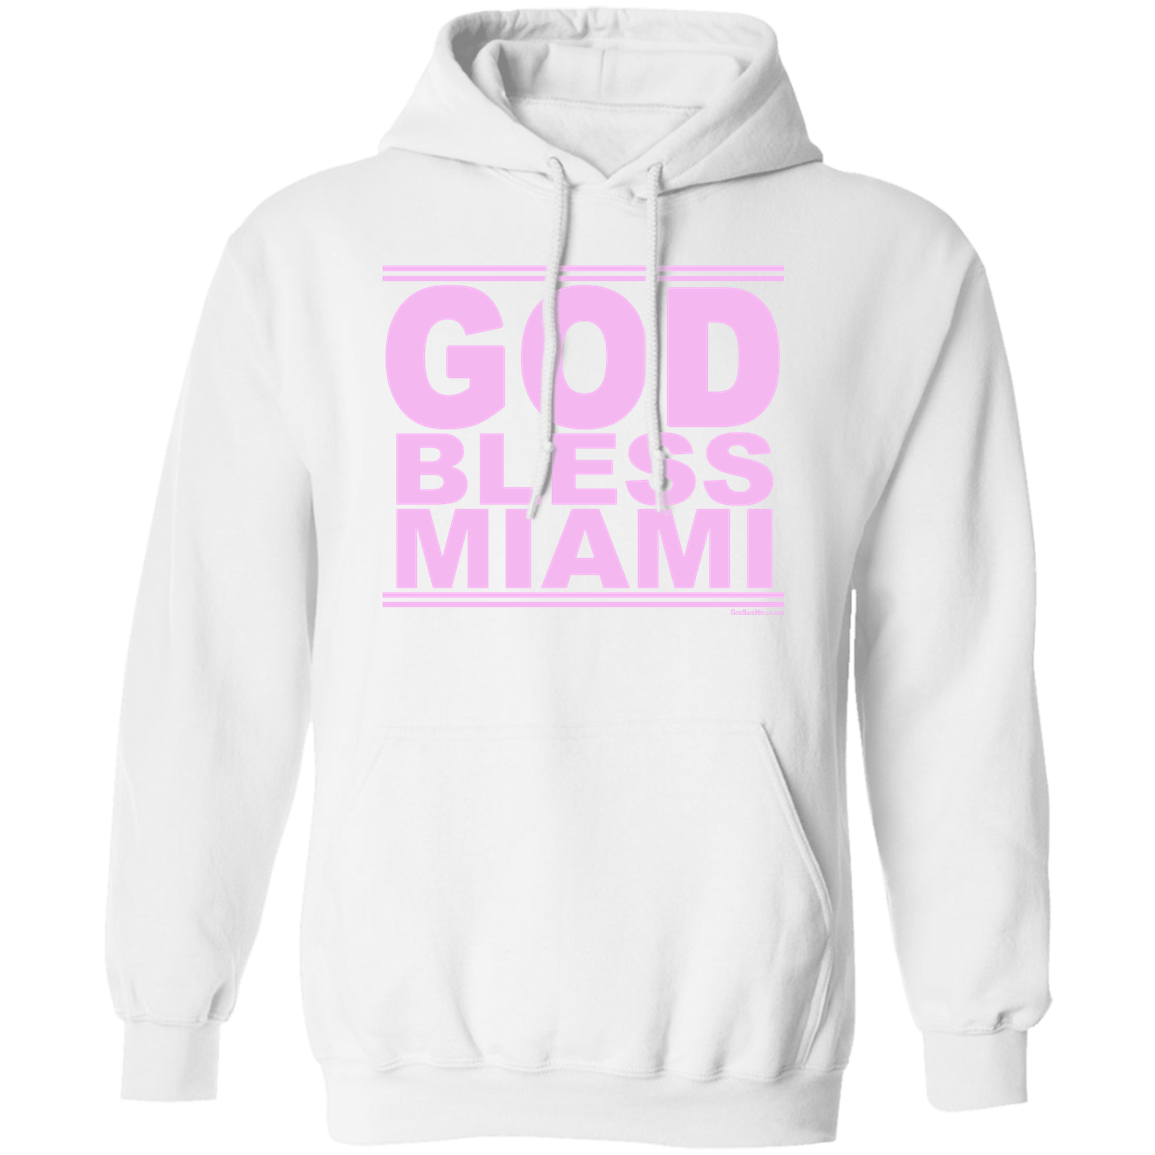 #GodBlessMiami - Pullover Hoodie